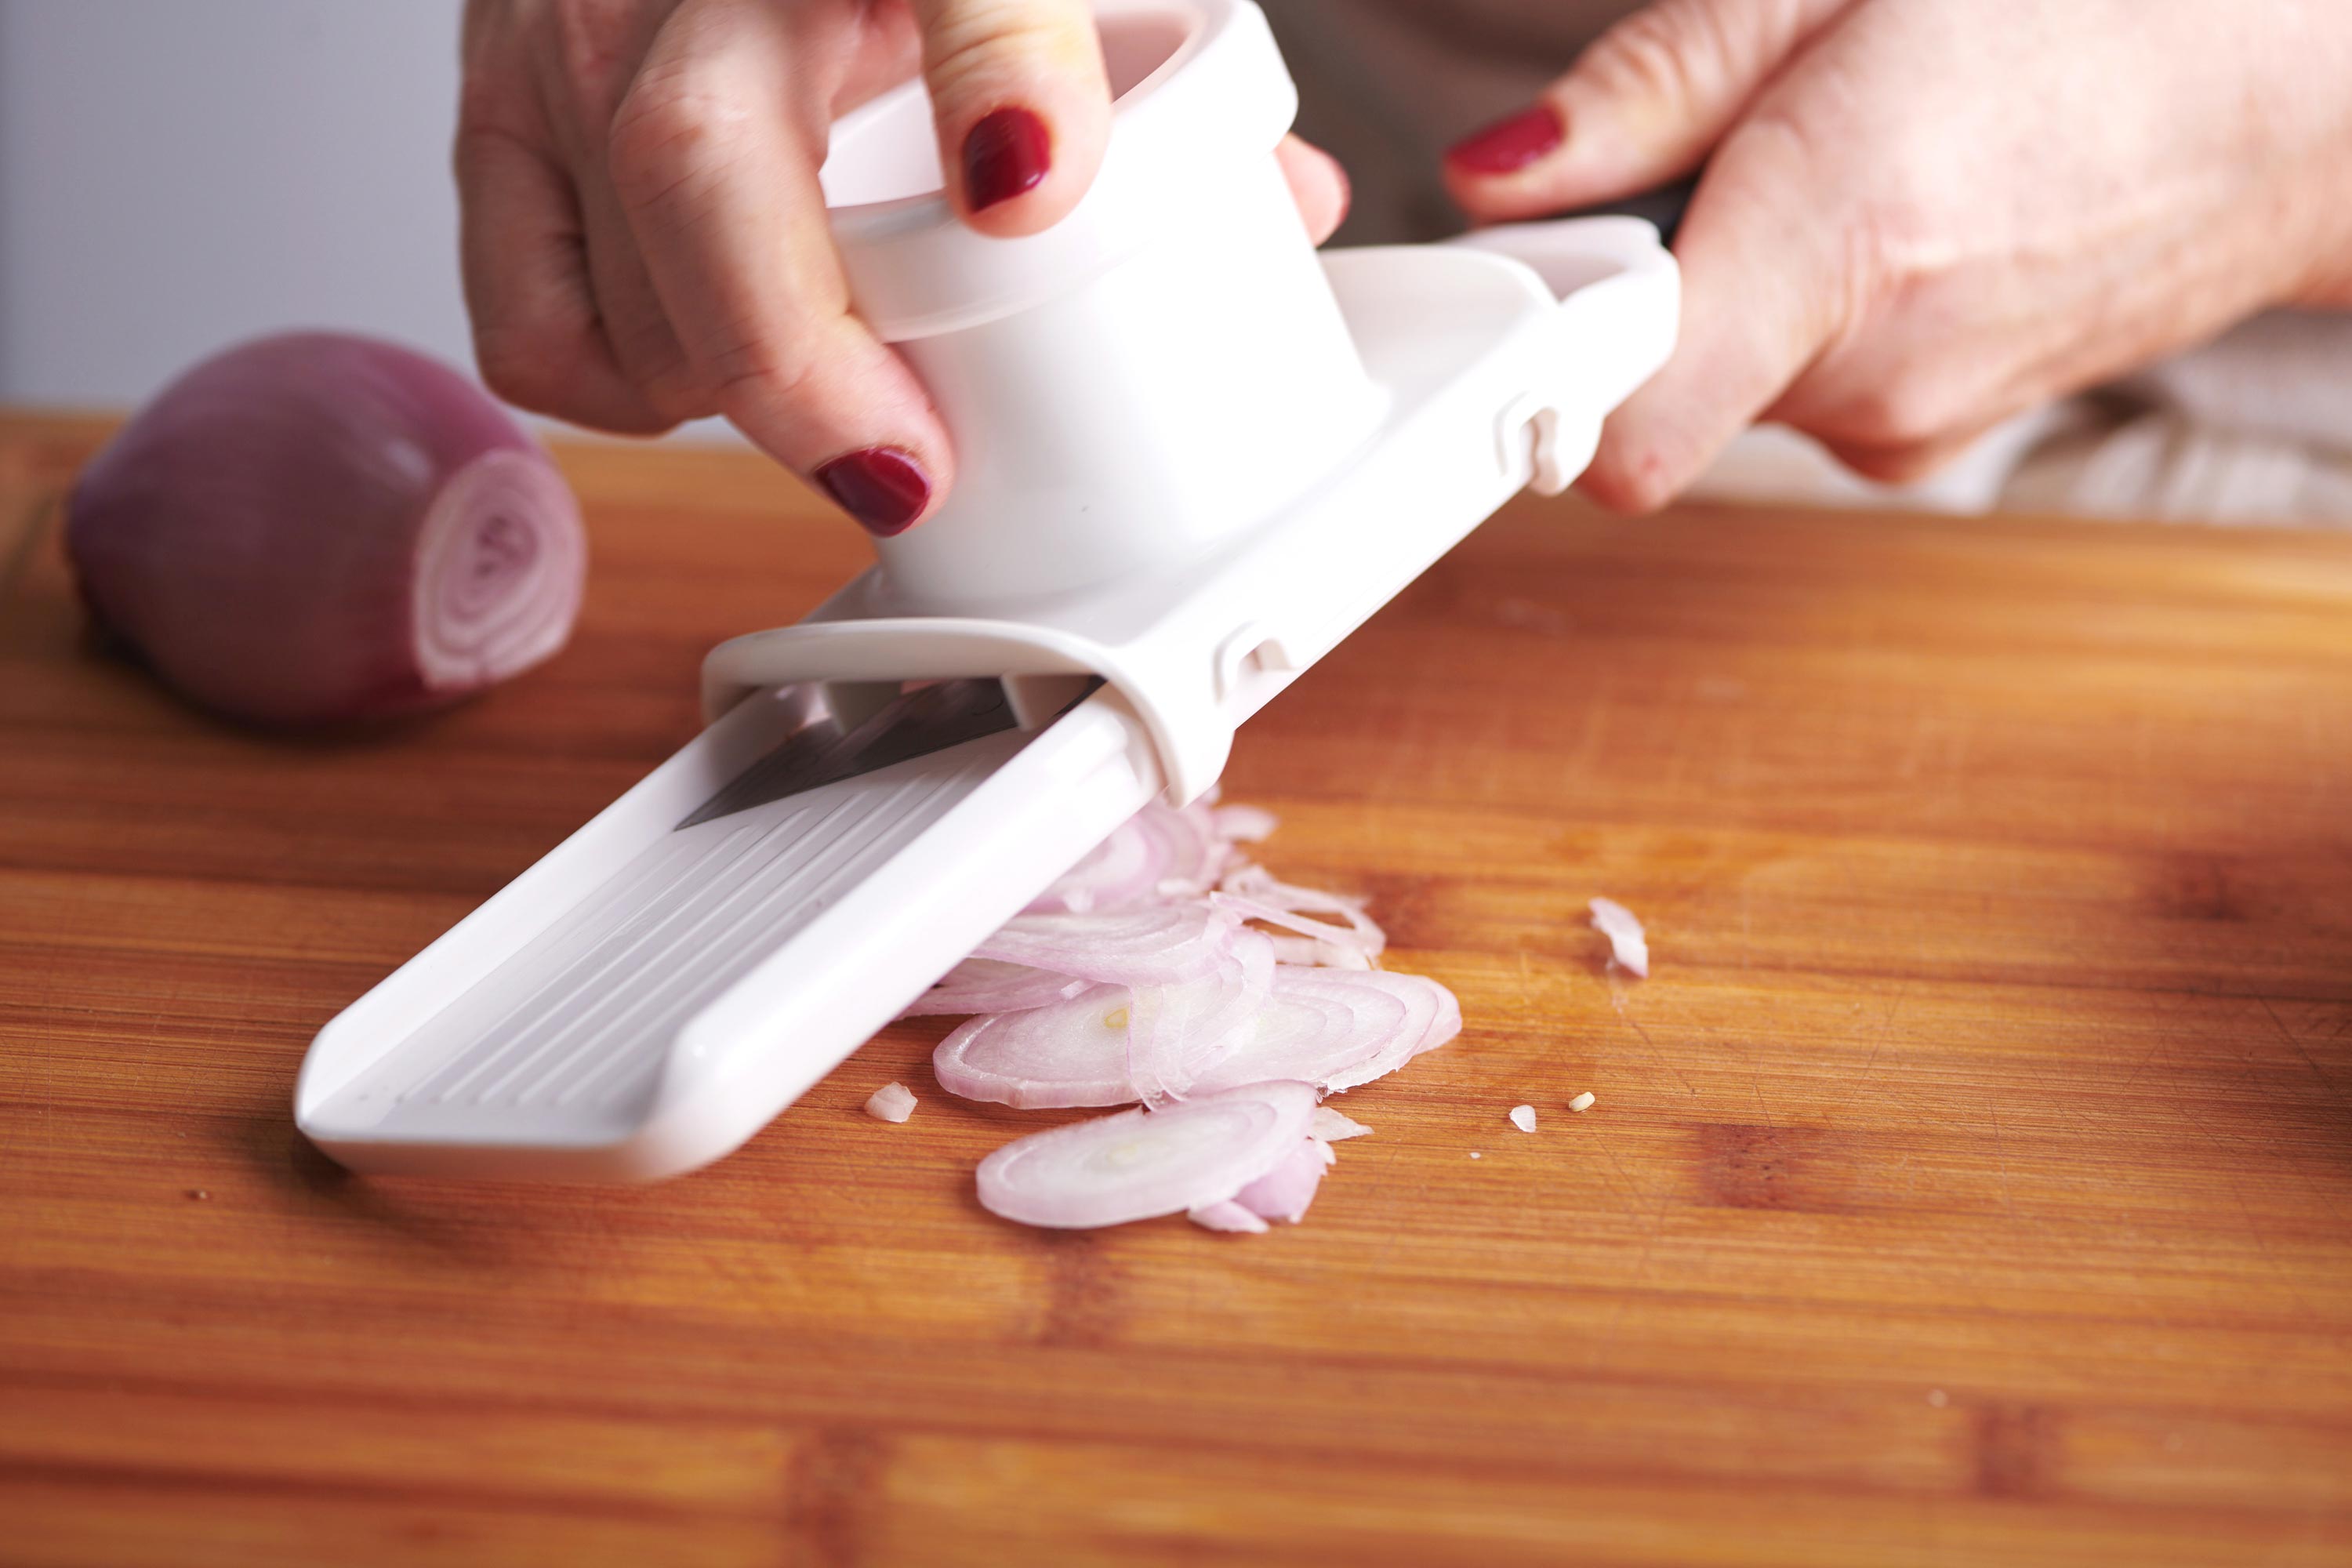 Woman slicing shallots with a vegetable slicer.